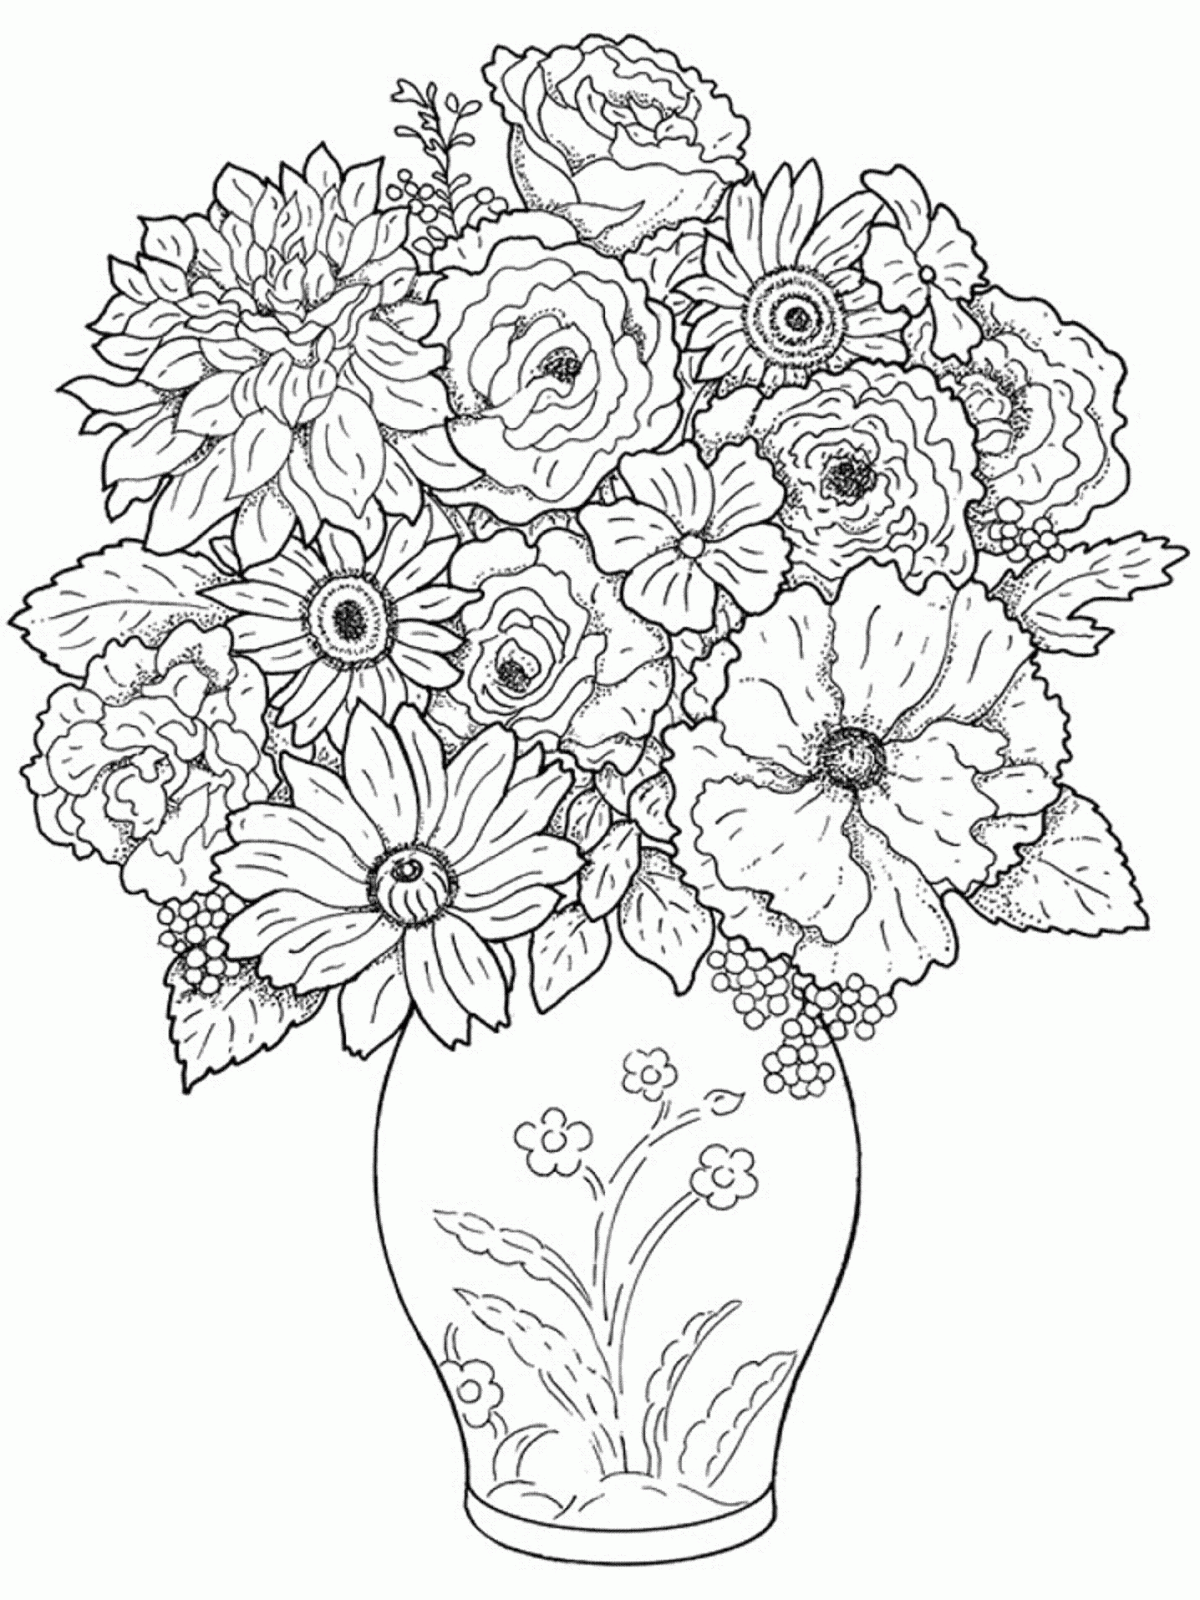 colours drawing wallpaper: Beautiful And Lovely Vase Flowers Colour